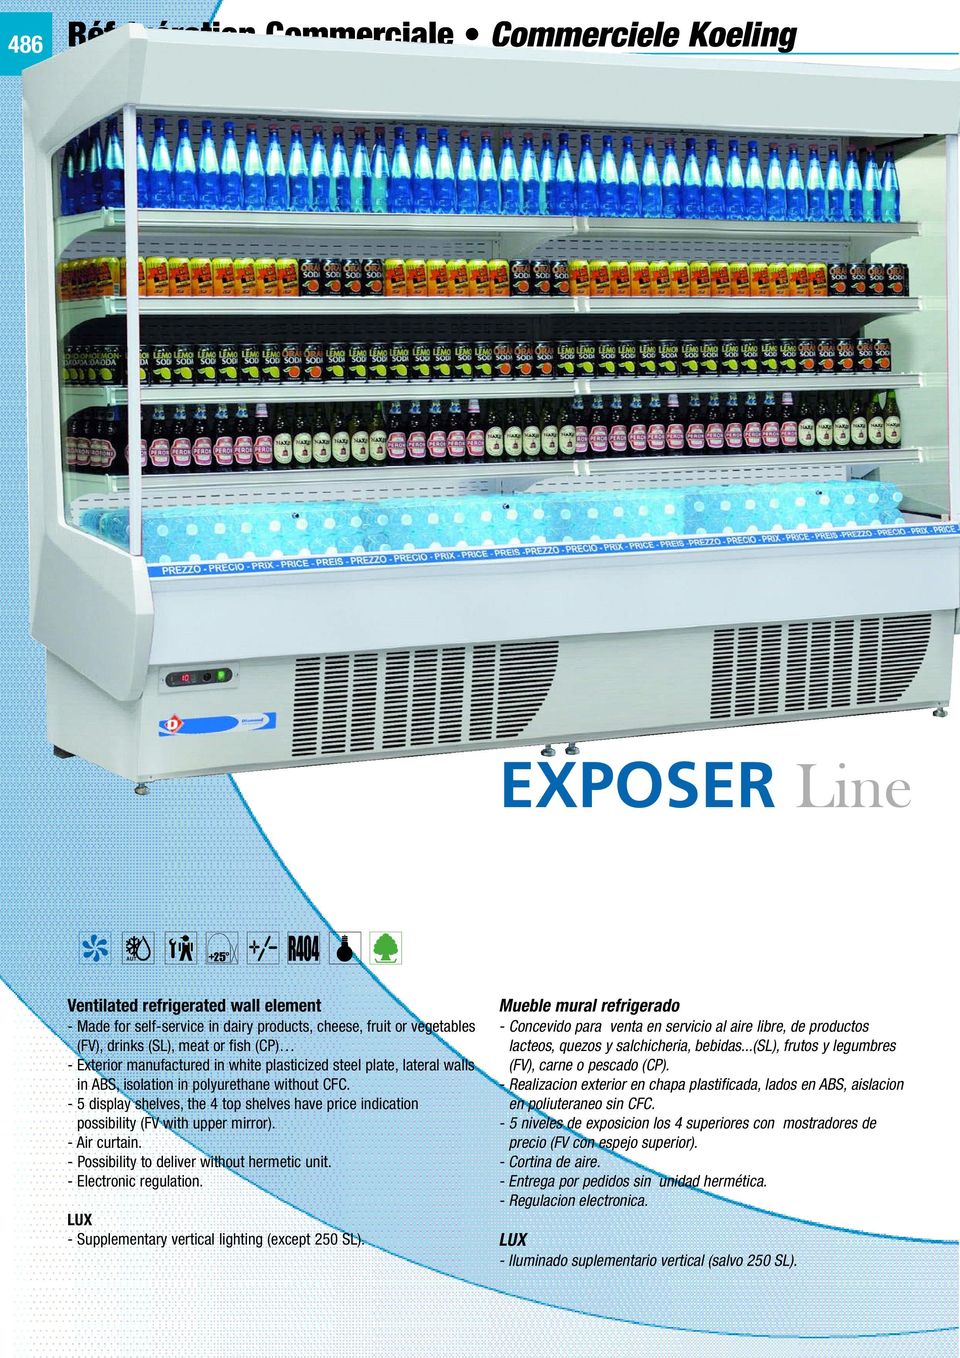 - 5 display shelves, the 4 top shelves have price indication possibility (FV with upper mirror). - Air curtain. - Possibility to deliver without hermetic unit. - Electronic regulation.